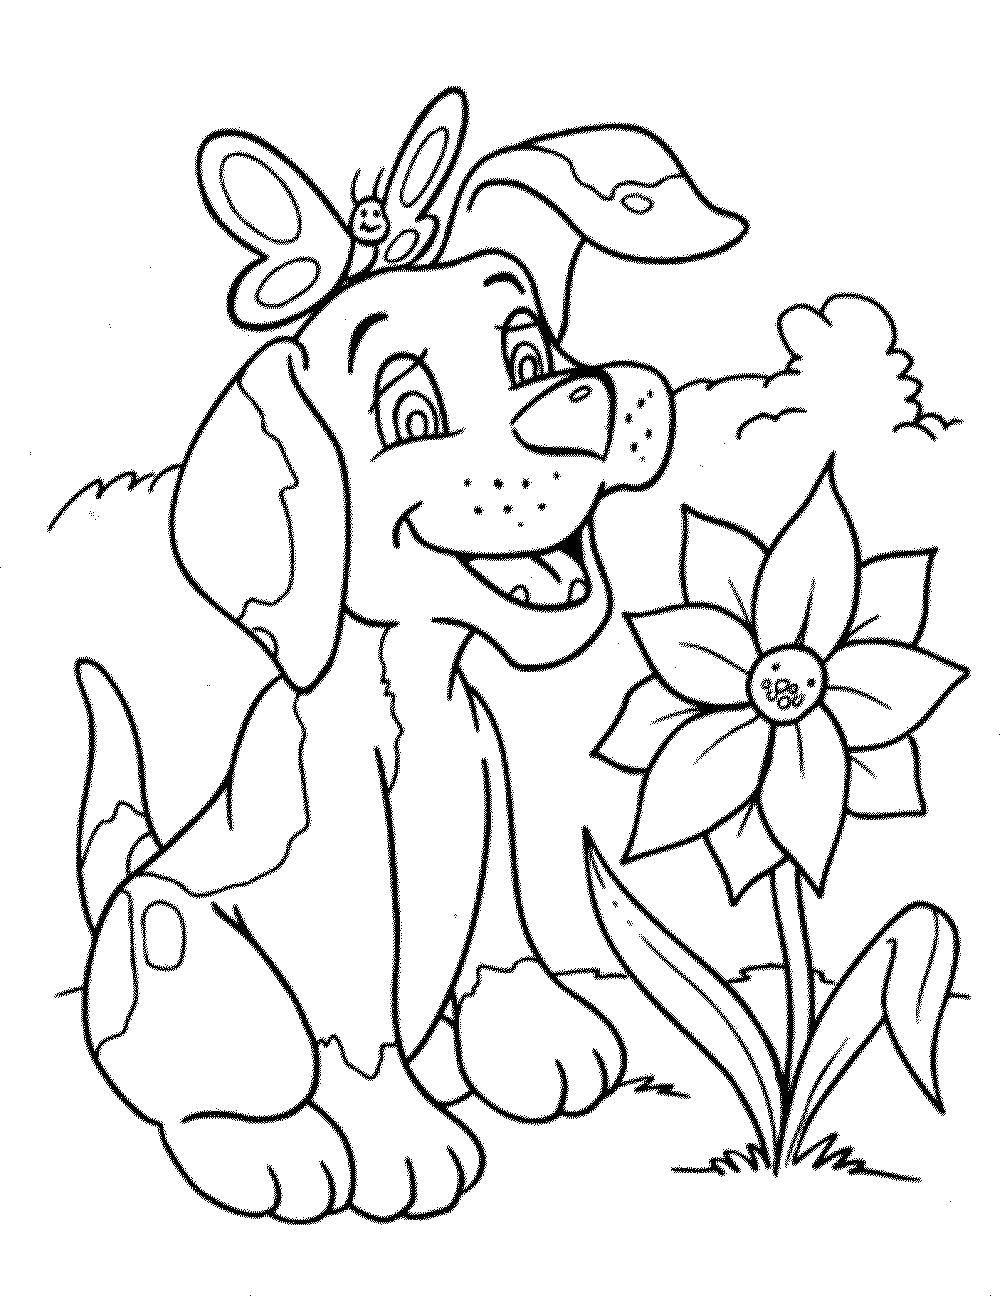 Coloring Dog with butterfly. Category Pets allowed. Tags:  dog, butterfly, flower.